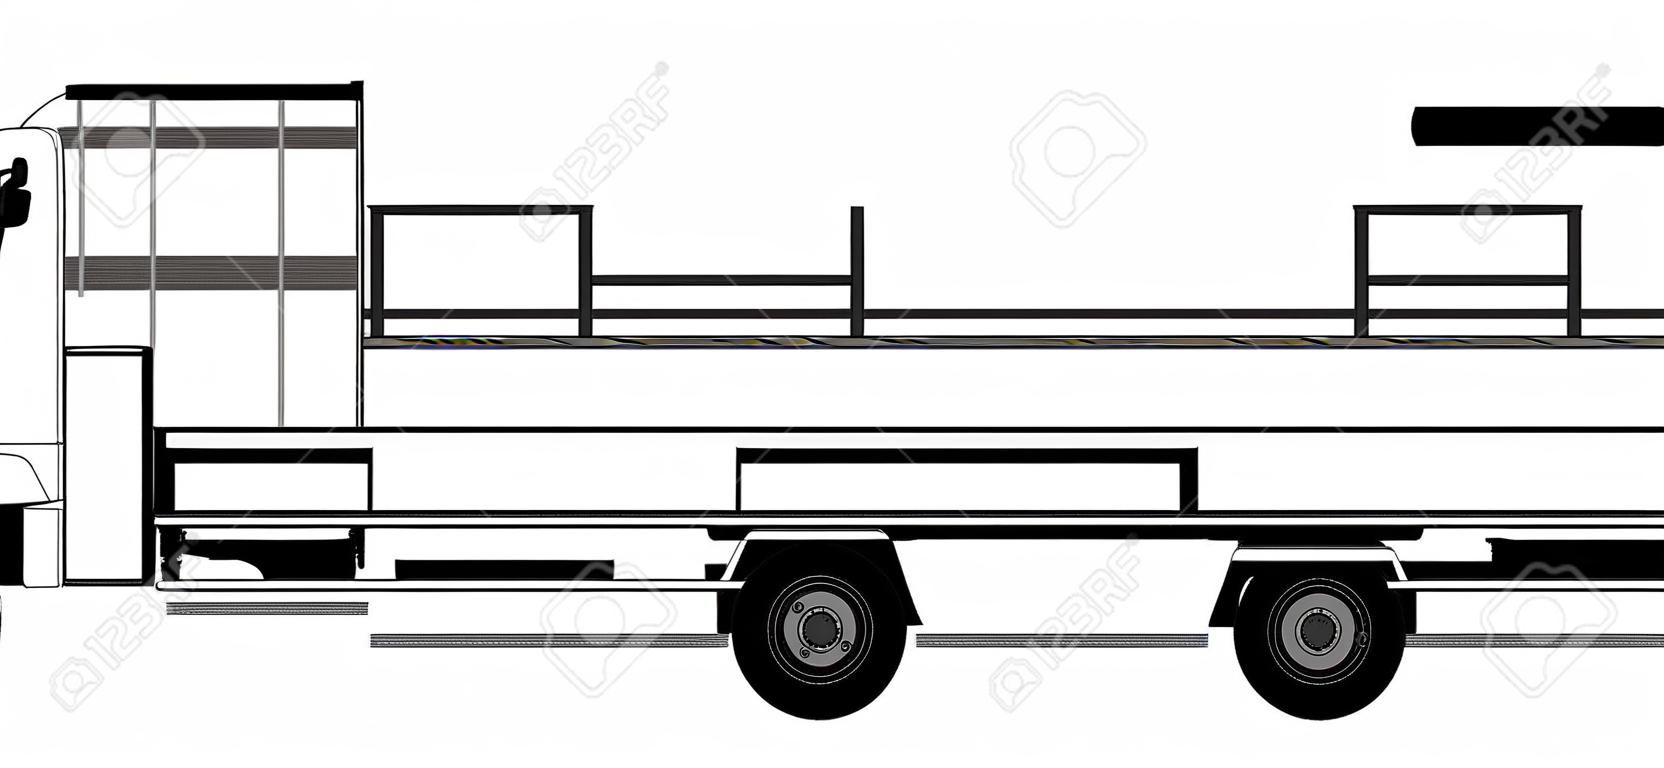 A side illustration of empty truck